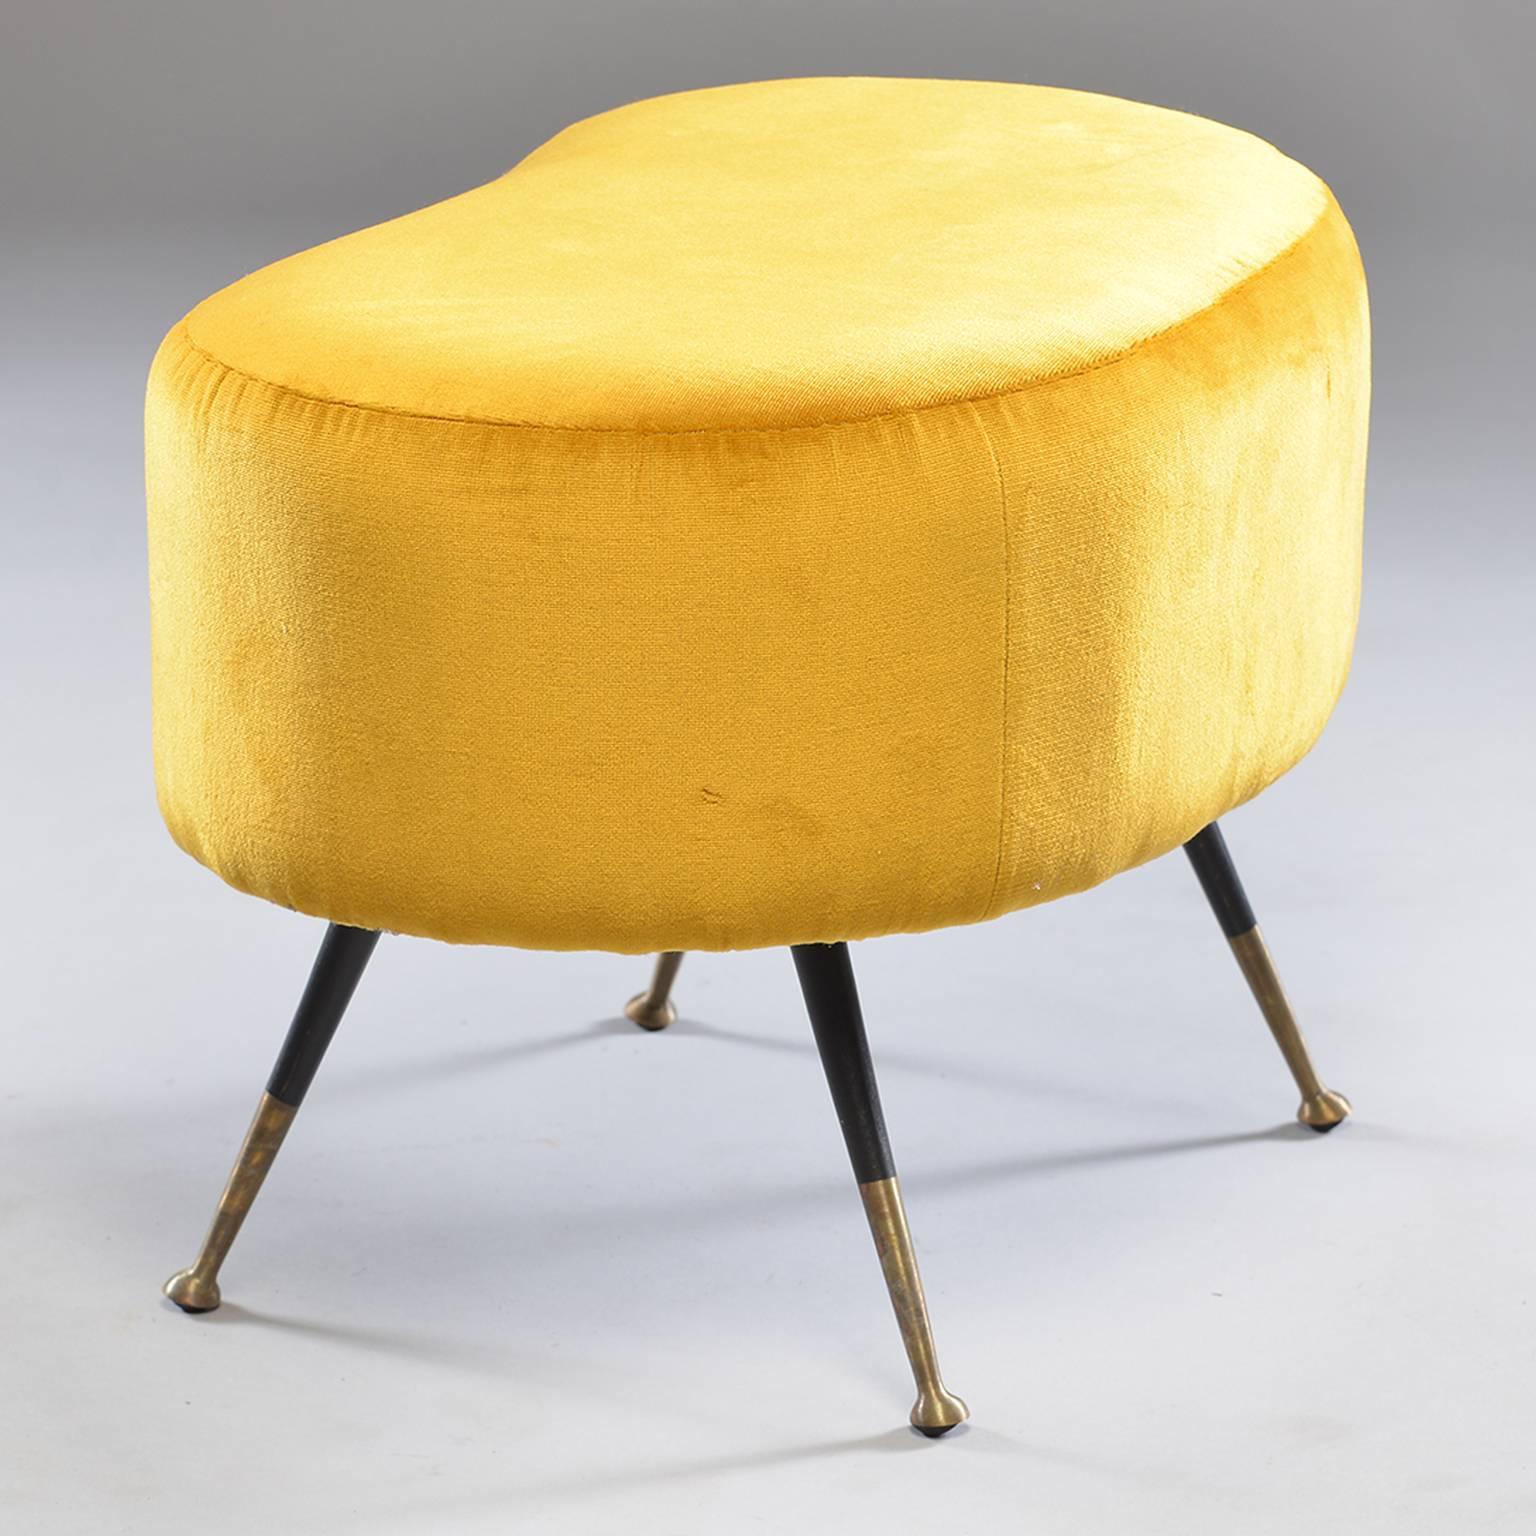 Pair of bright mustard yellow Italian kidney shaped benches or stools in the style of Carlo de Carli, circa 1960. Yellow upholstery is recent with tapered black legs and brass feet. Sold and priced as a pair. May consider splitting.